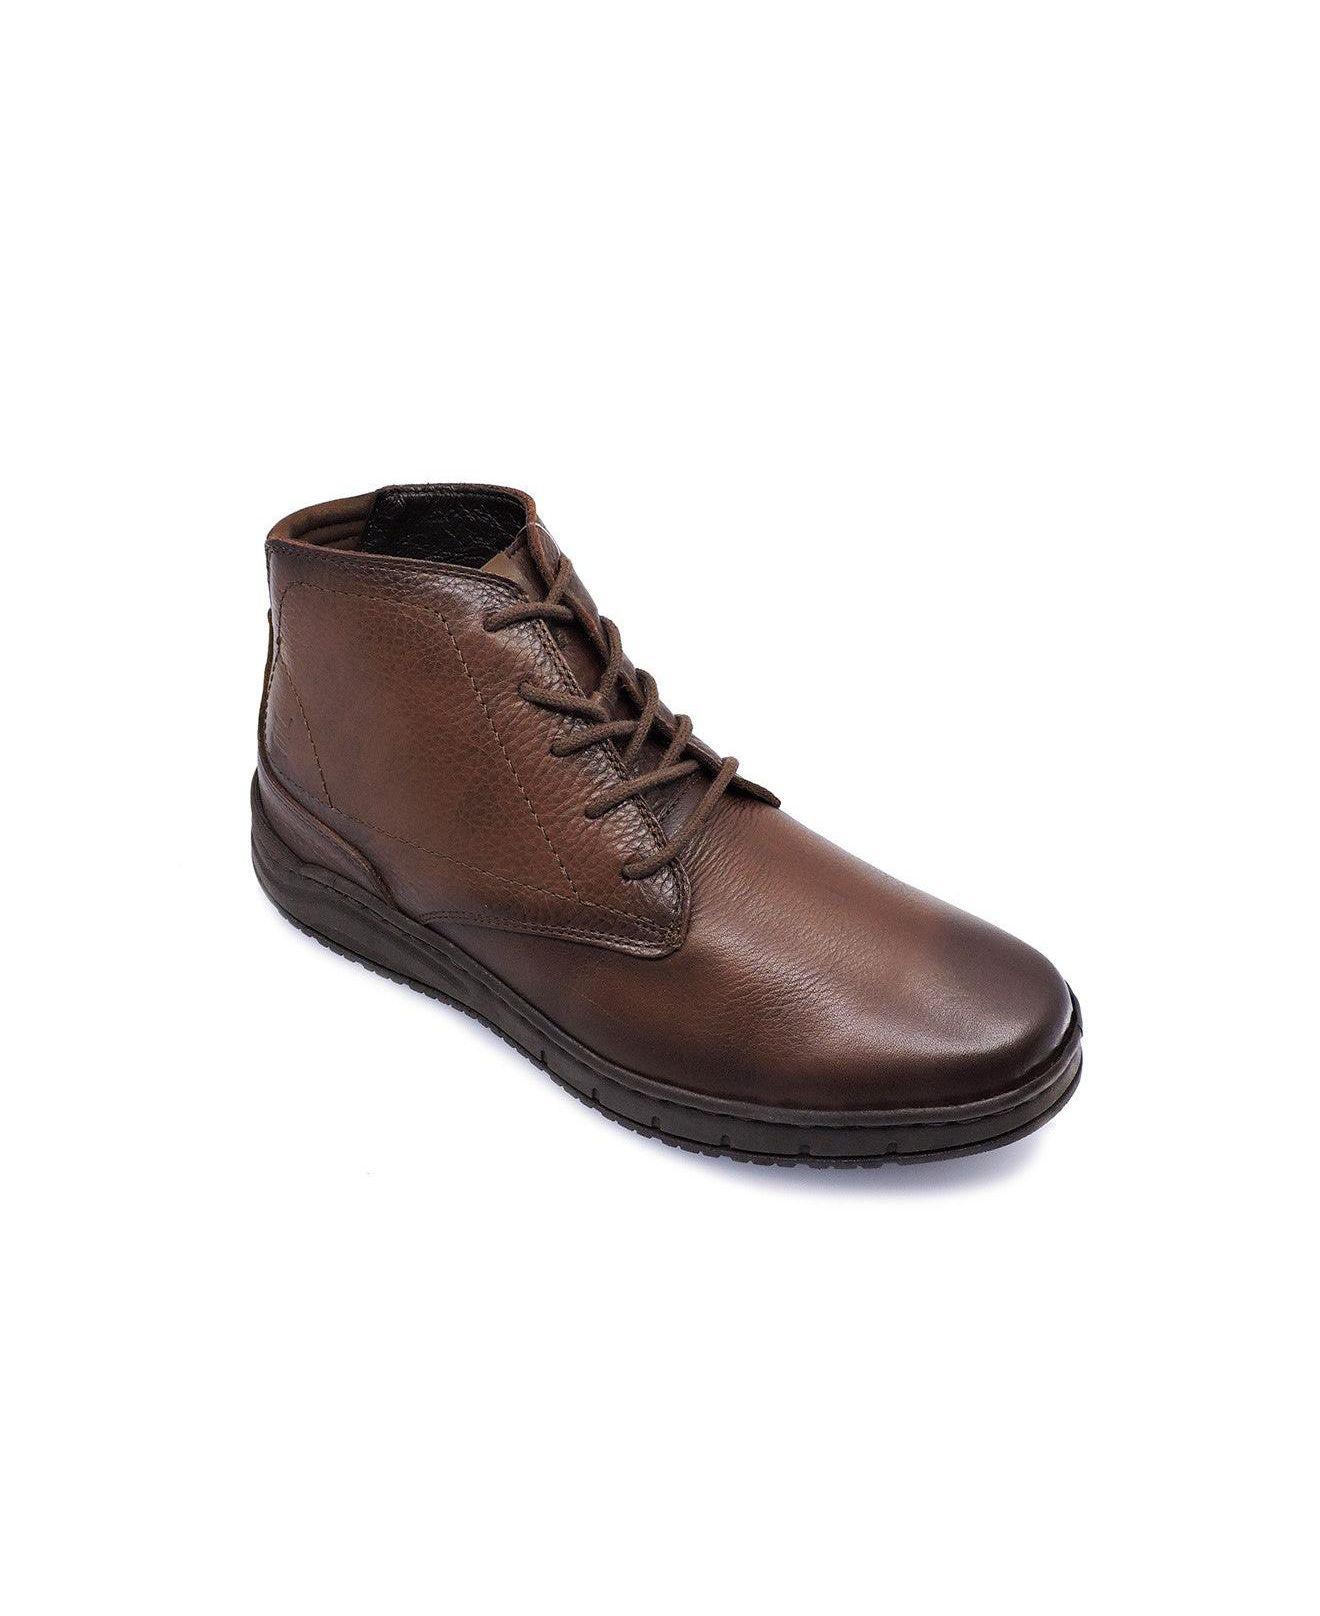 Lobo Solo Brown Premium Leather Boots, Handmade Unique Shoes With Laces  Closure, Luka 9402 for Men | Lyst